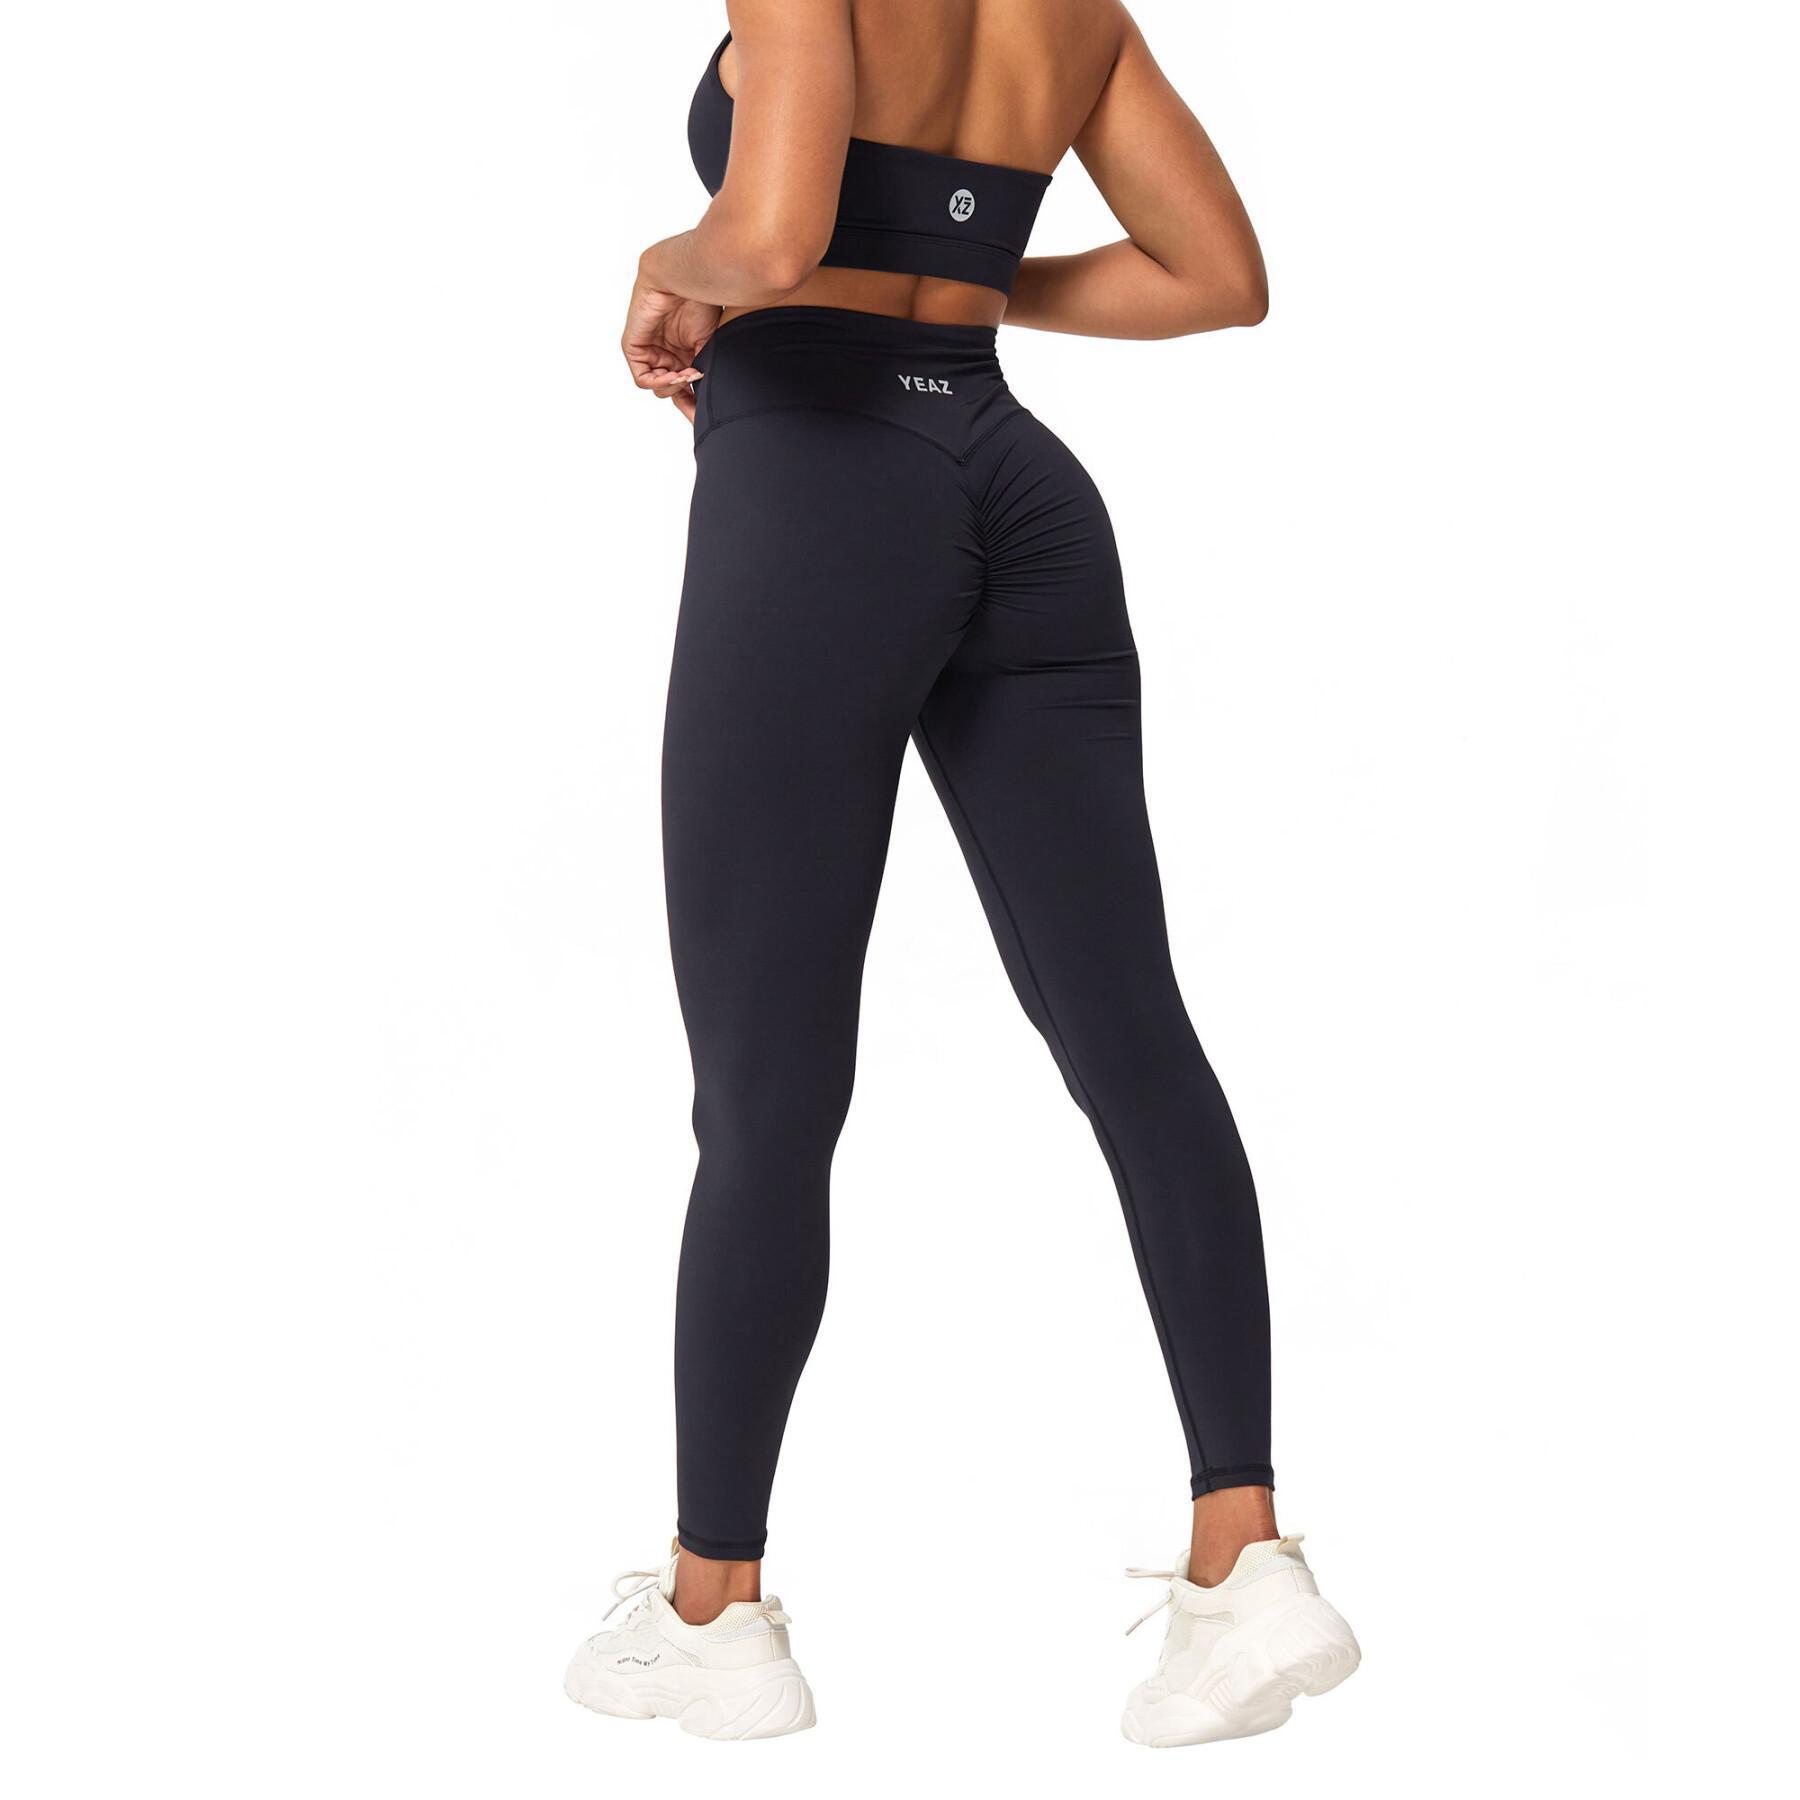 Women's high-waisted bra and leggings set Yeaz Mission